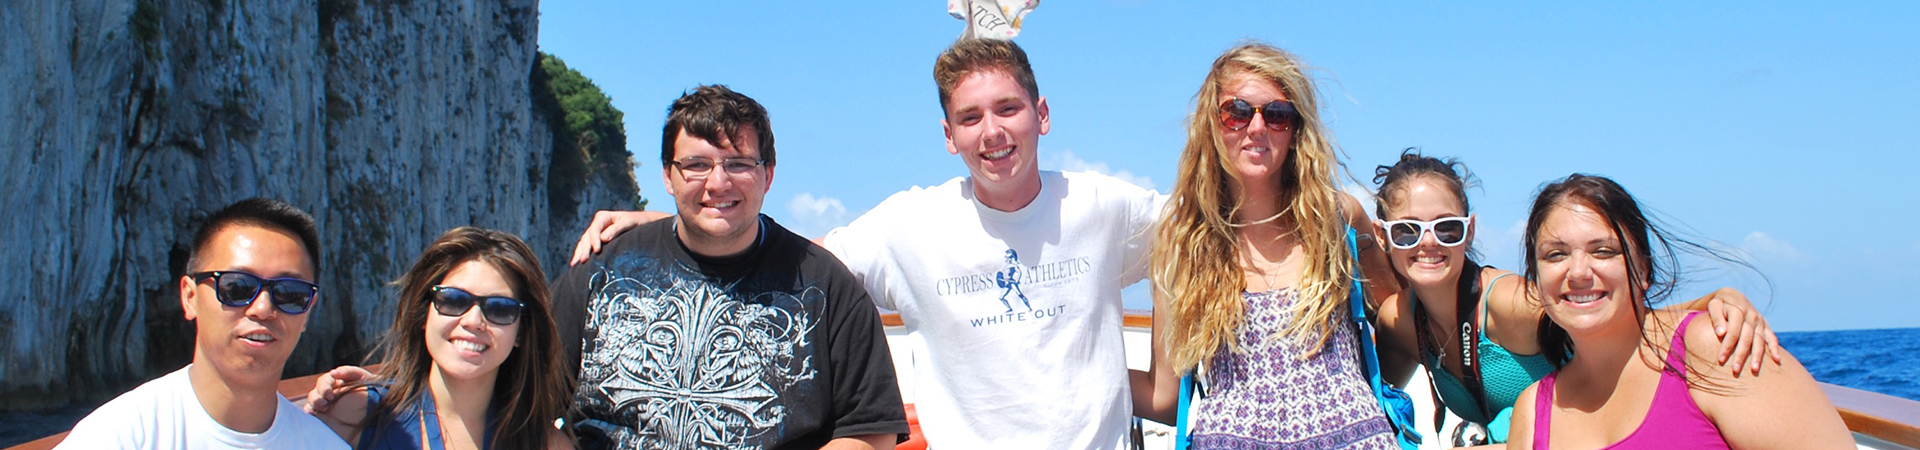 Group of students on a boat traveling abroad